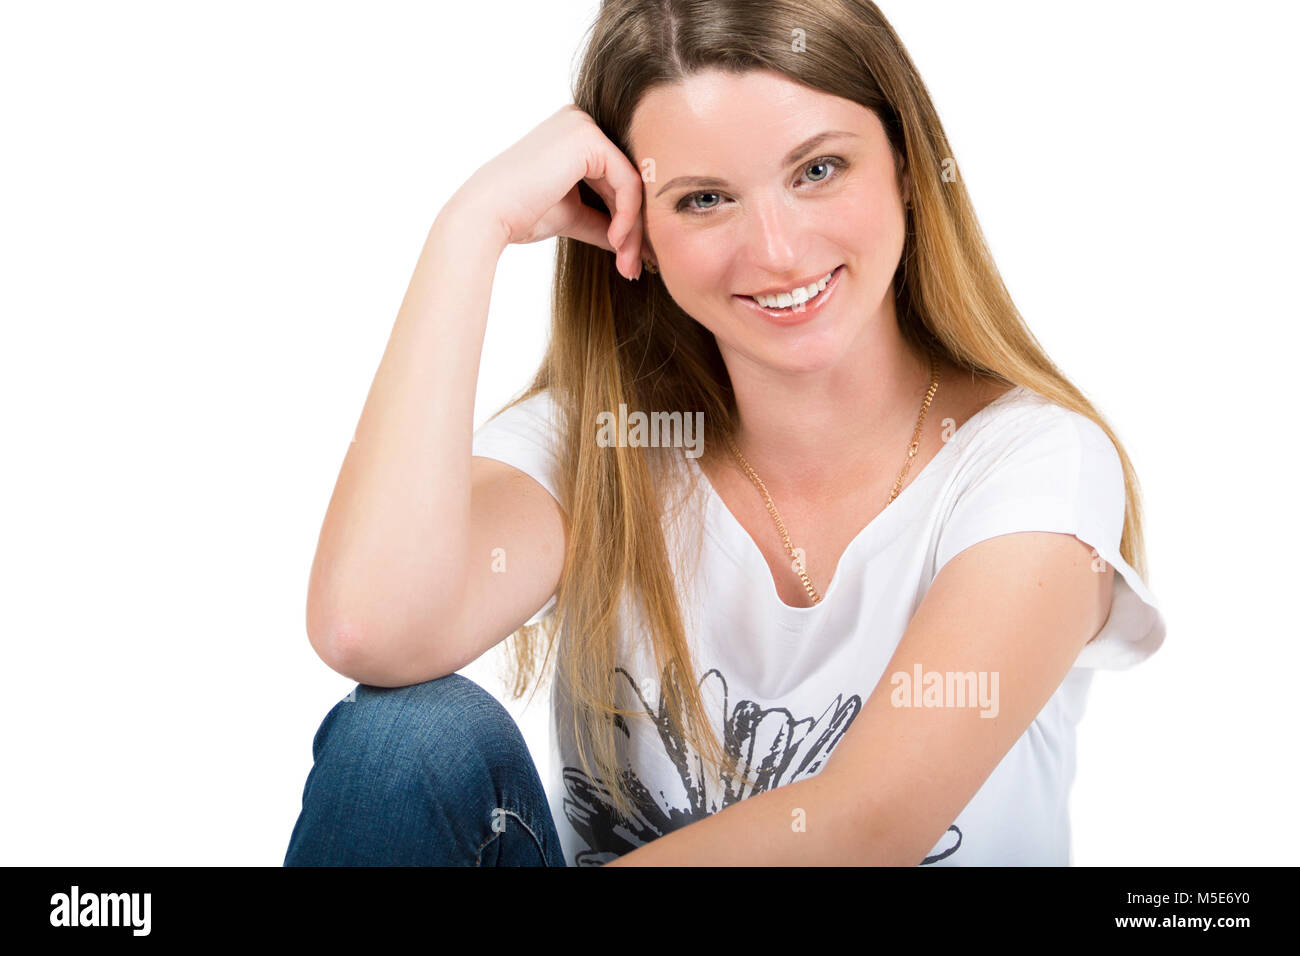 Portrait of a beautiful cheerful young woman on a white background Stock Photo